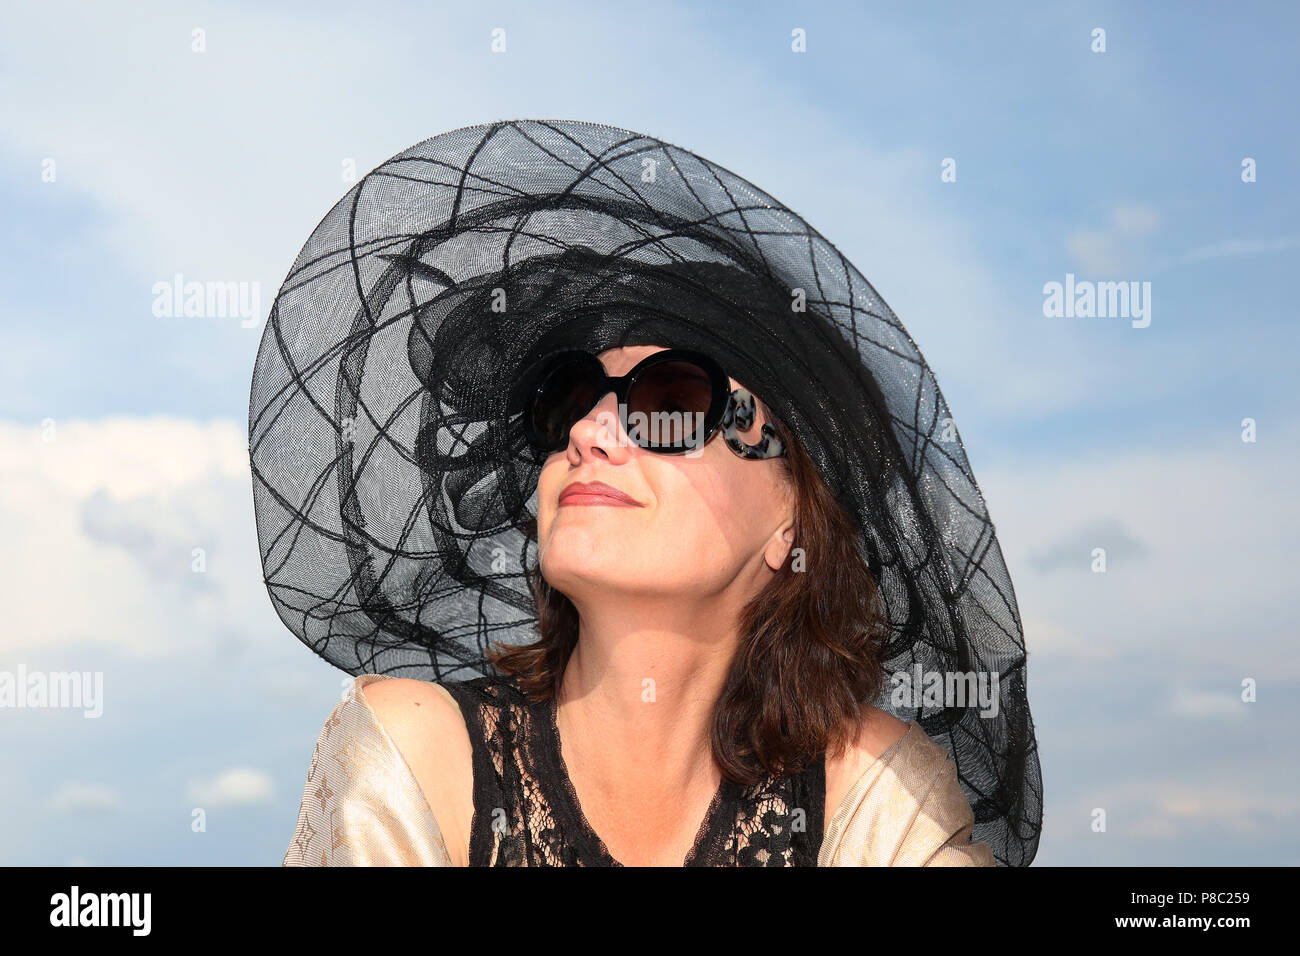 Iffezheim, Fashion, elegantly dressed woman with hat on the racecourse Stock Photo